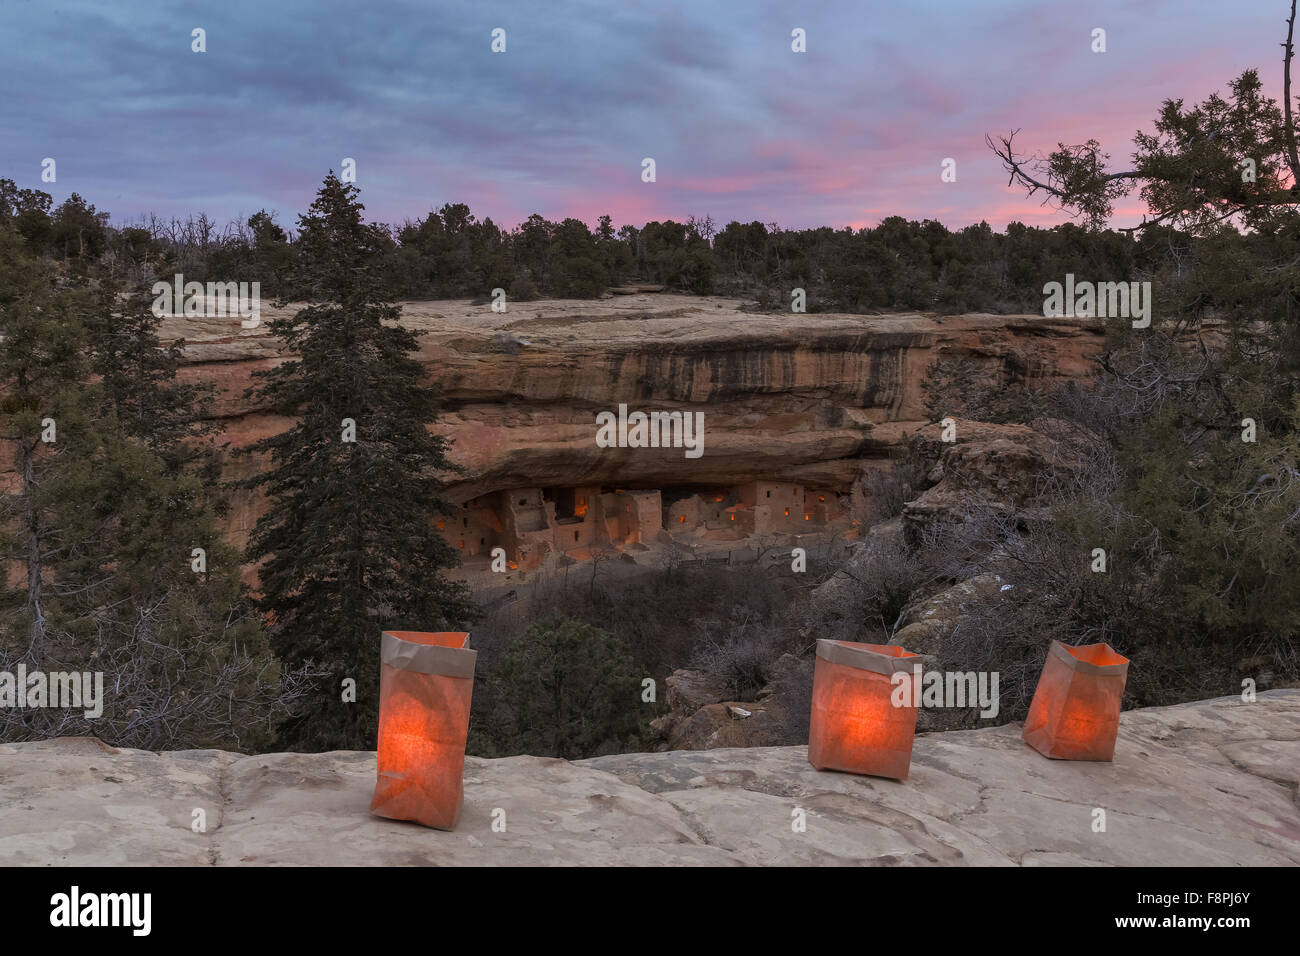 Mesa Verde, Colorado, USA. 10th Dec, 2015. Spruce Tree House the best preserved of the Native American cliff dwellings is illuminated by hundreds of small paper lanterns known as luminaria to celebrate the holiday season during open house December 10, 2015 in Mesa Verde National Park, Colorado. Stock Photo